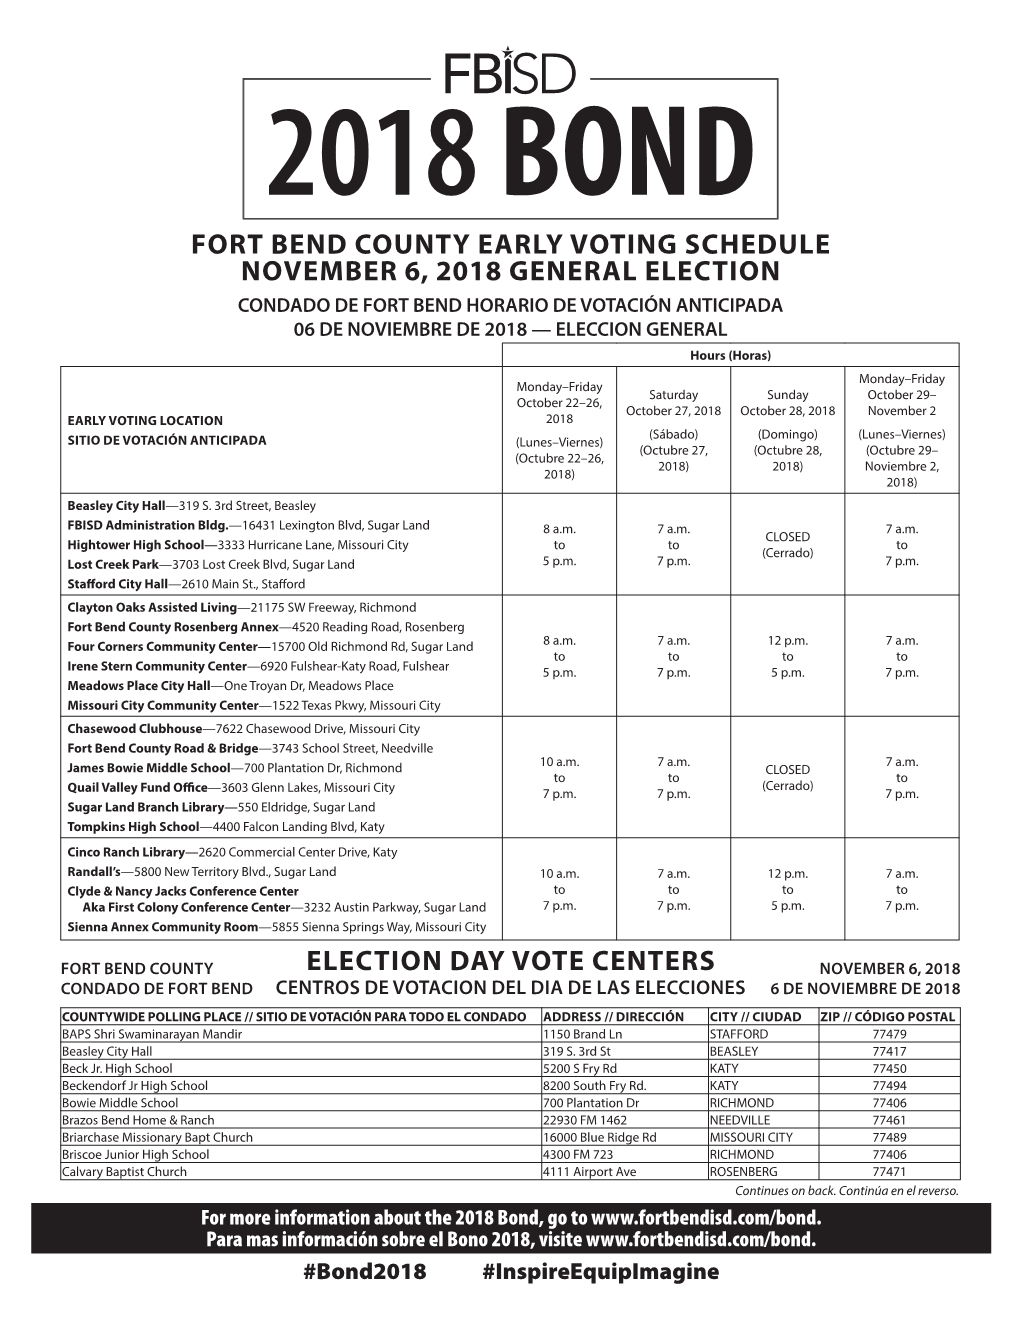 Fort Bend County Early Voting Schedule November 6, 2018 General Election